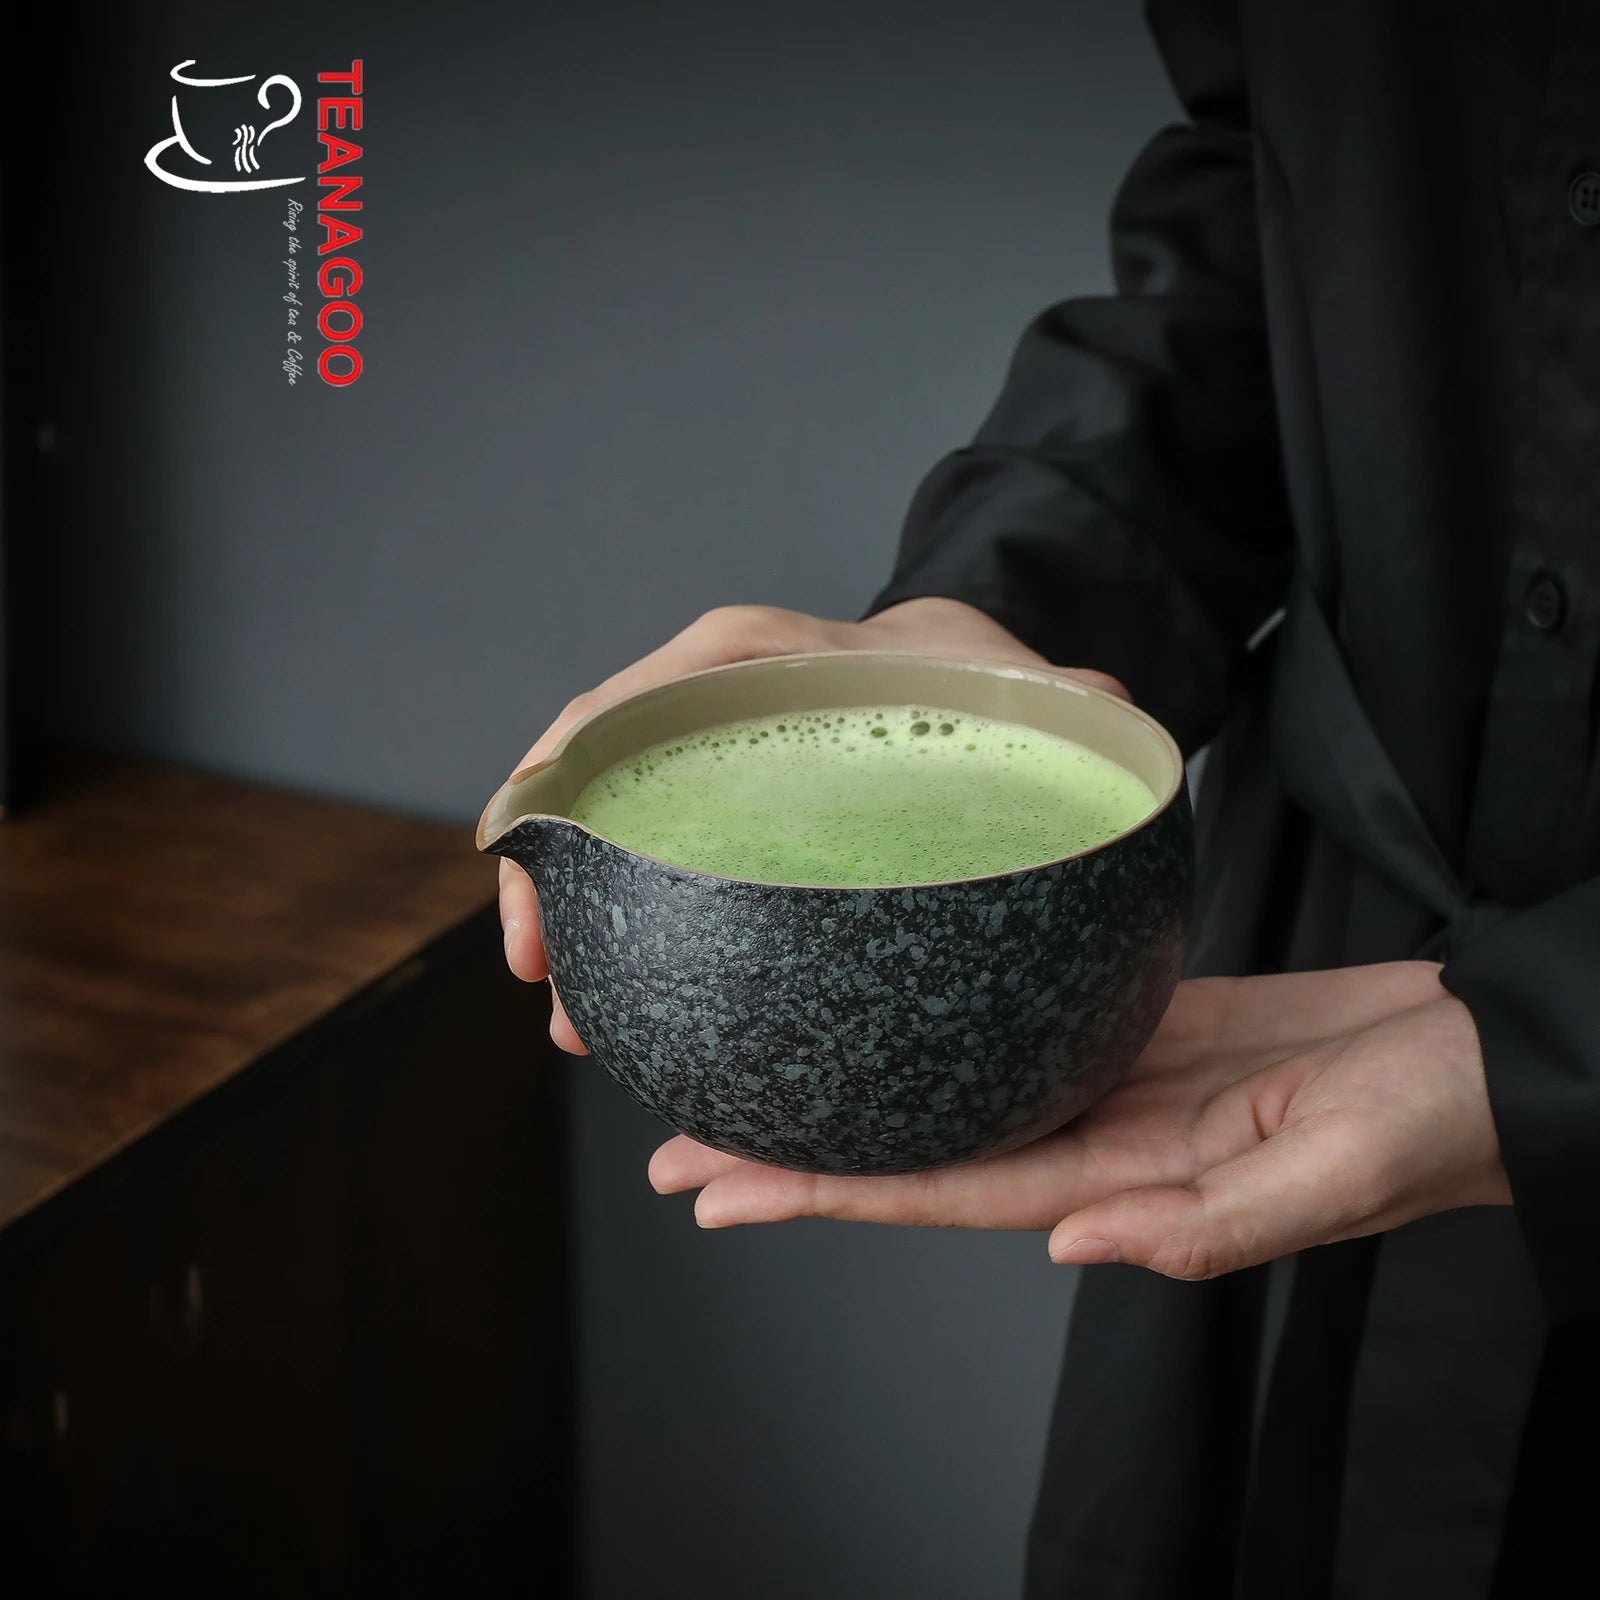 Japanese Natural Rock Texture Ceramic Matcha Chawan Ceramic Bowl with Whisk Rest Holder Matcha Tea Bowl Ceremonial Accessories